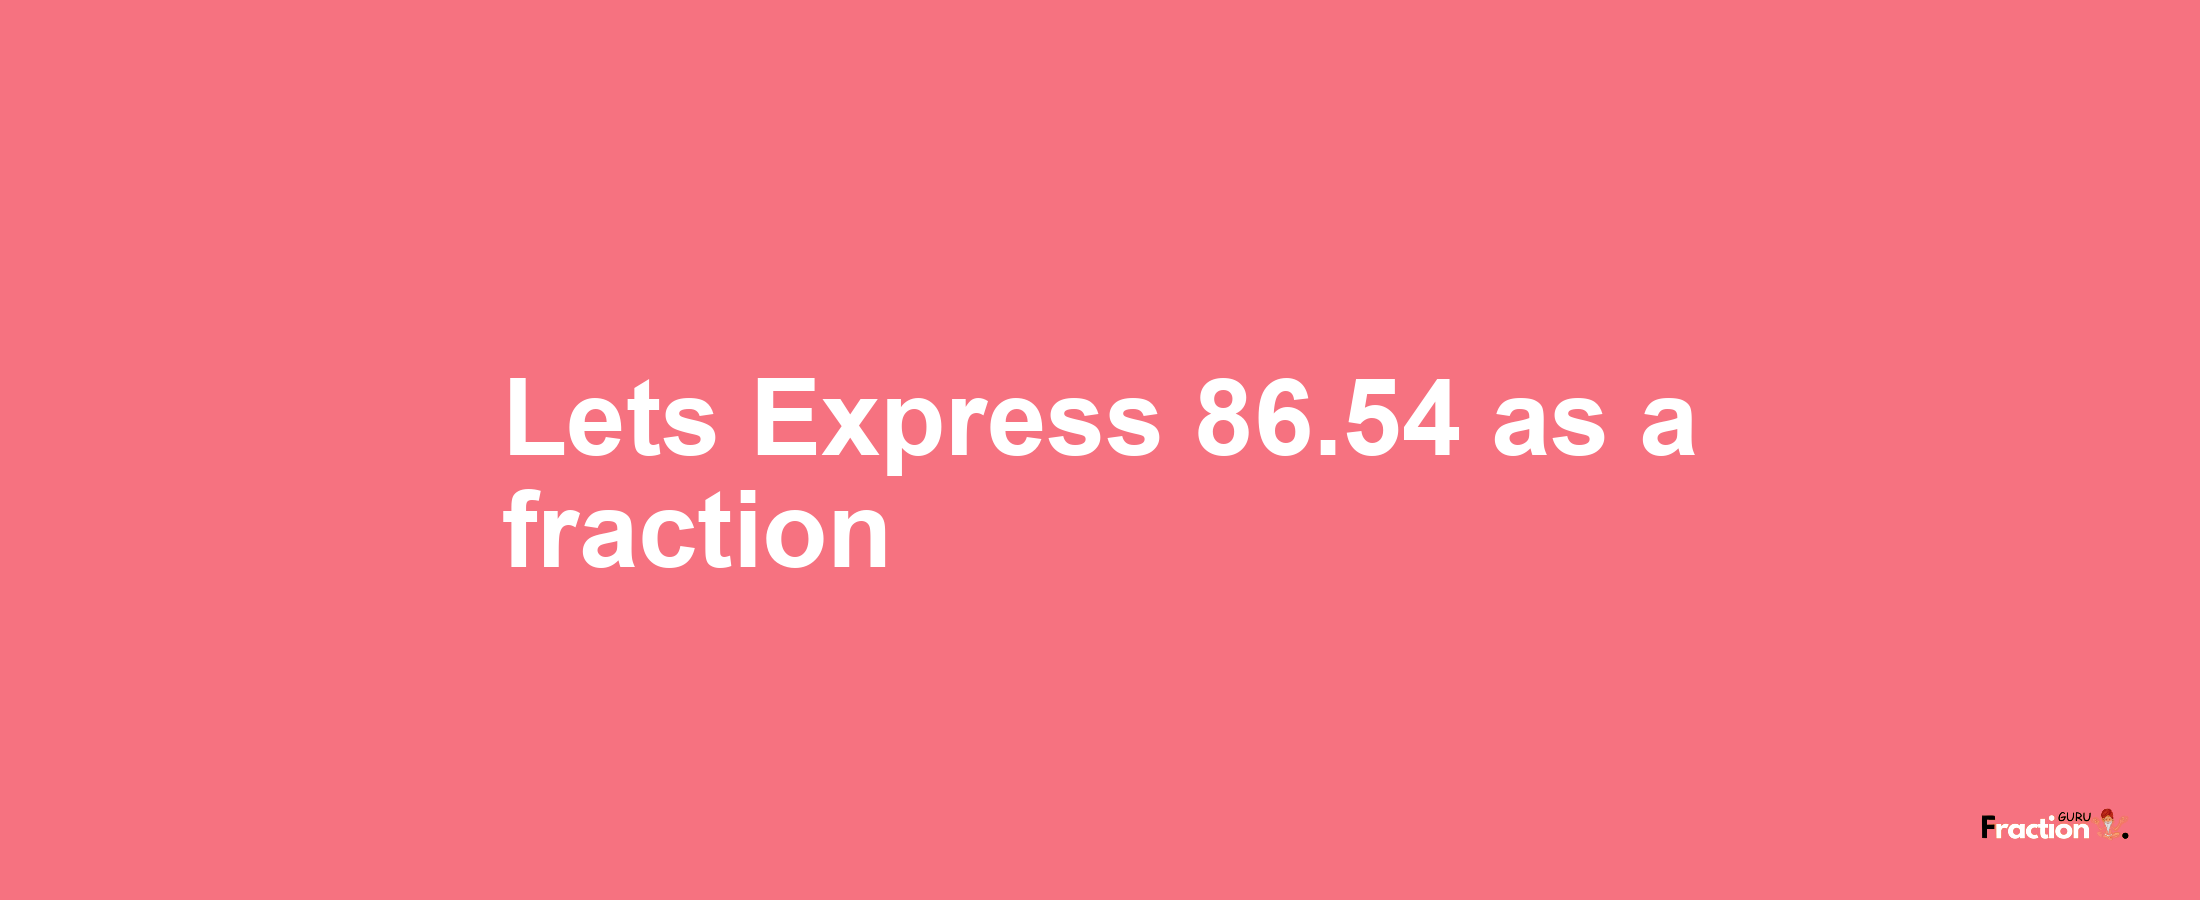 Lets Express 86.54 as afraction